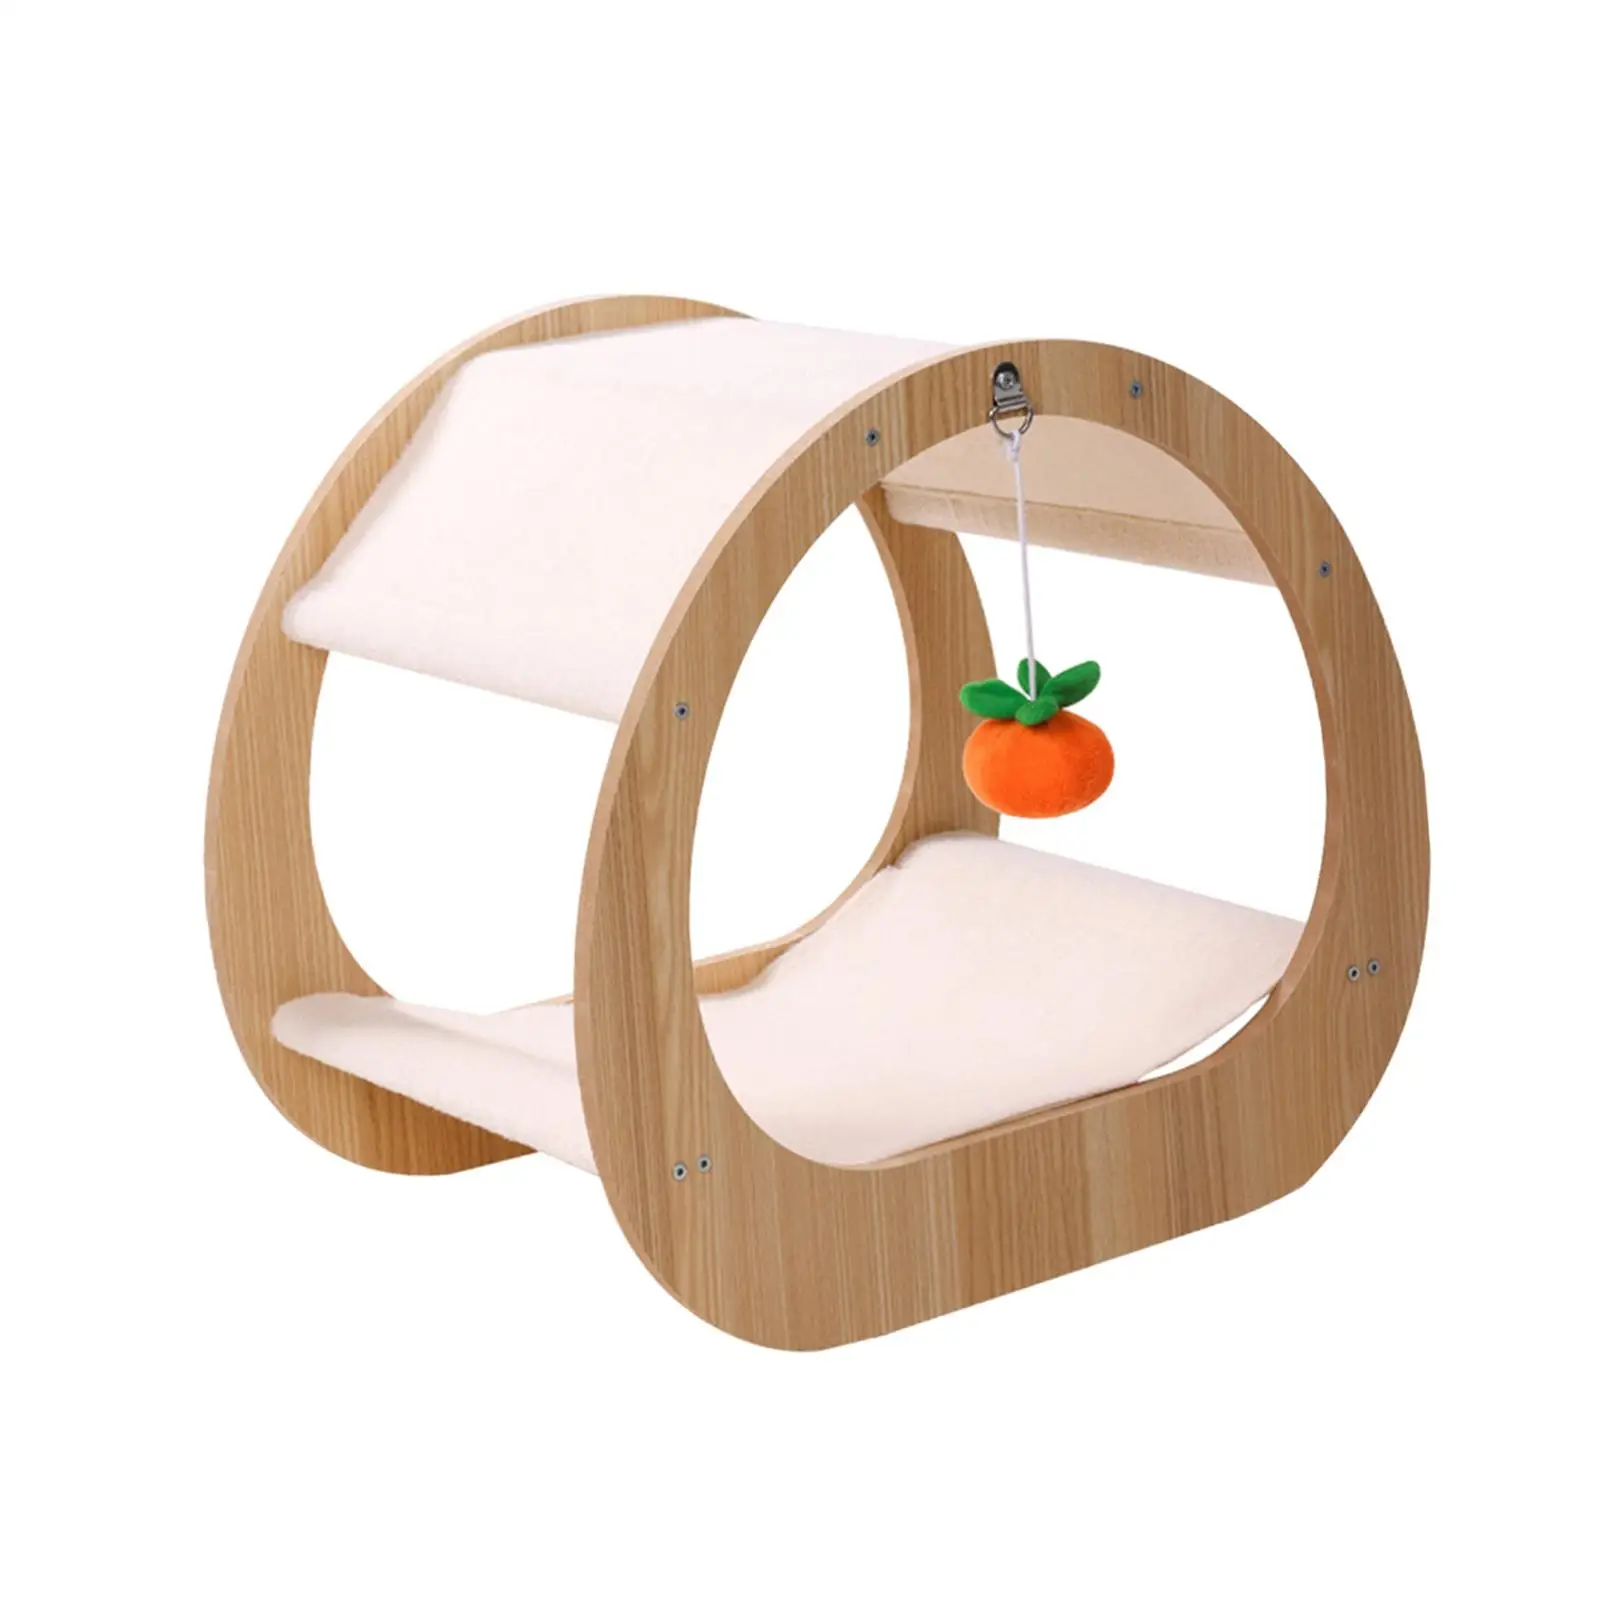 Cat Scratch Post Grinding Claw Interactive Play House Multifunction for Kitten Rabbit Small Medium Cats Indoor Cats Kitty